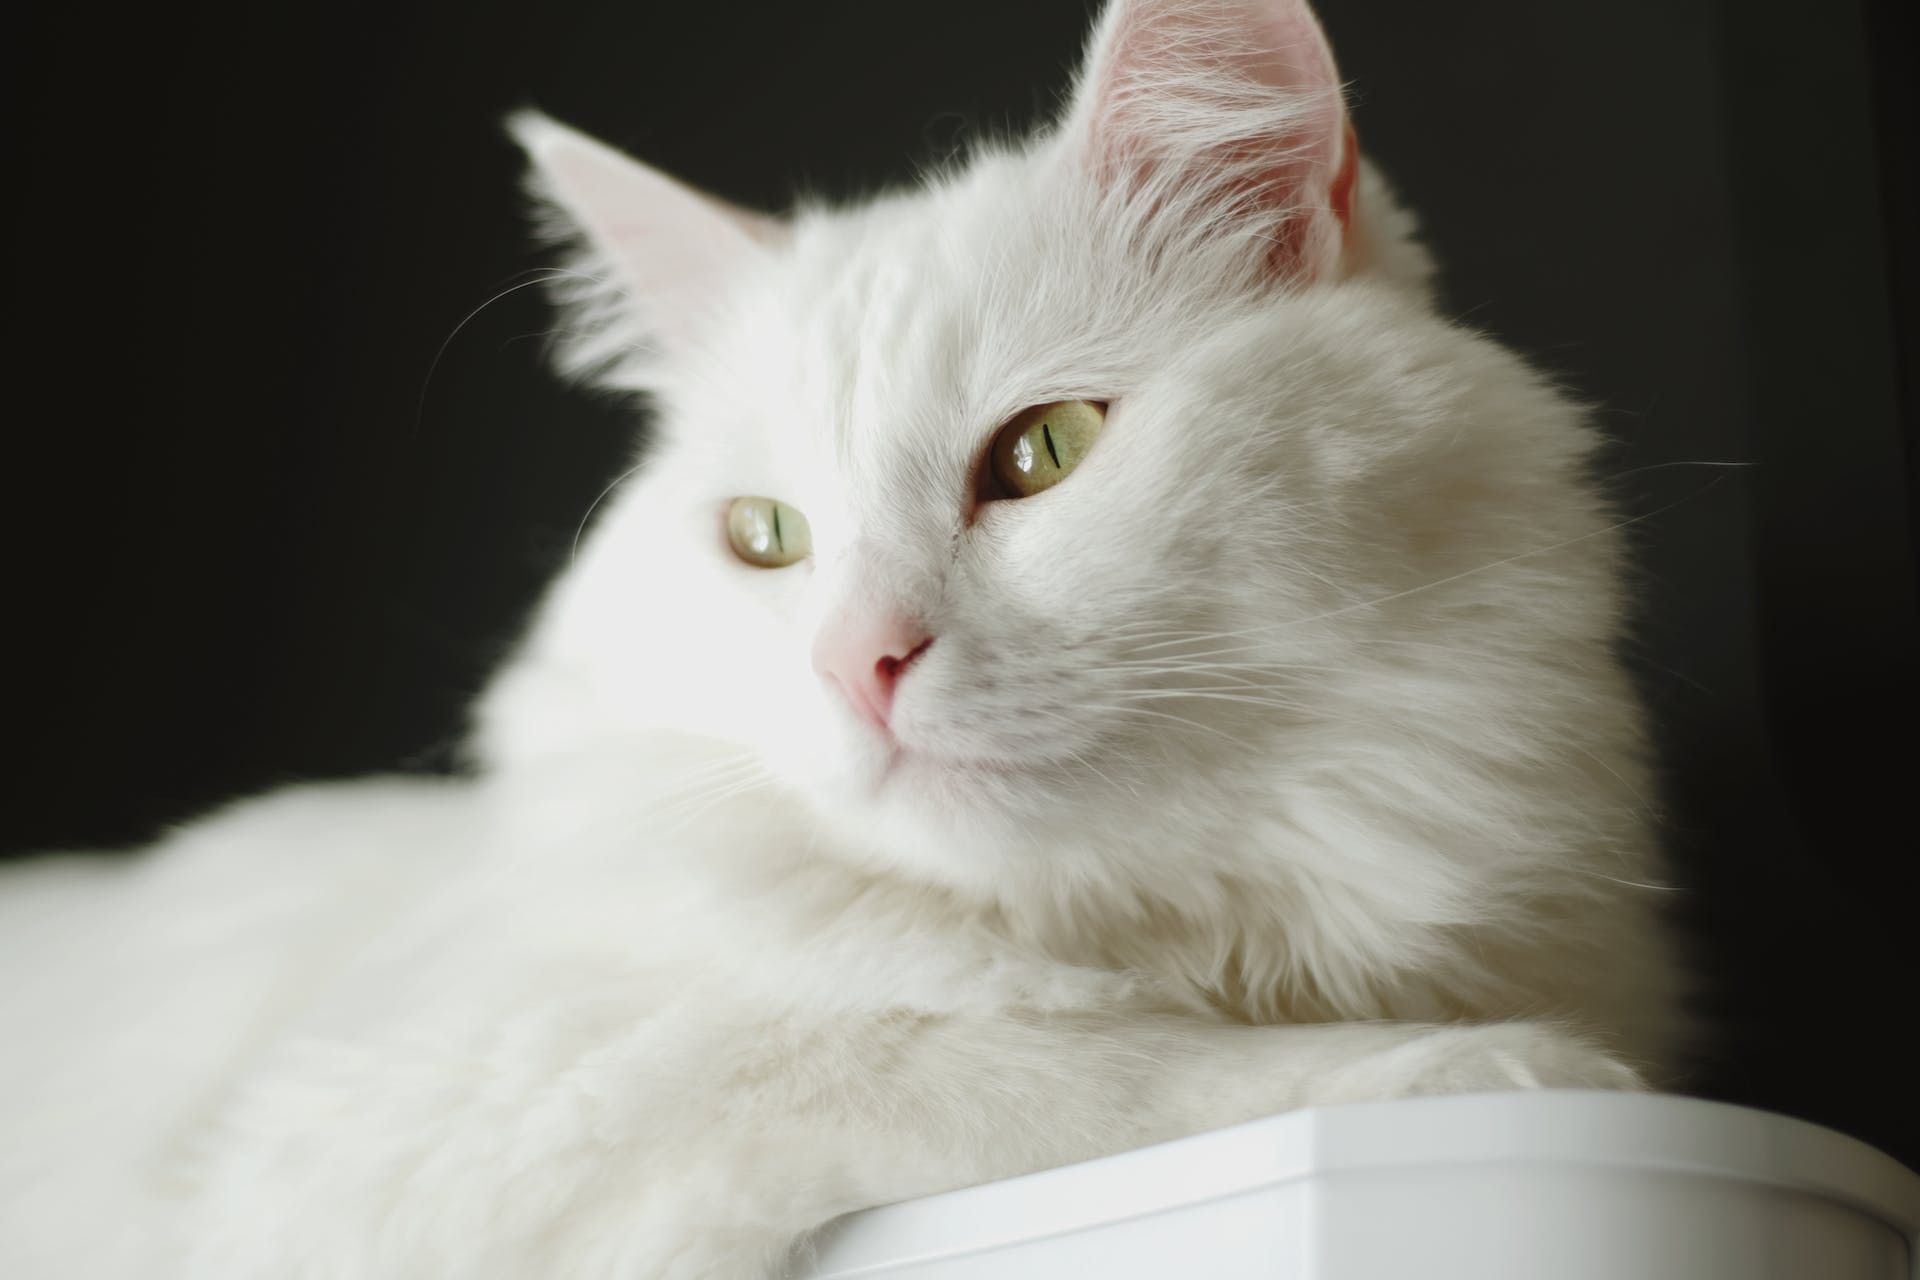 A white Turkish Angora cat with green eyes